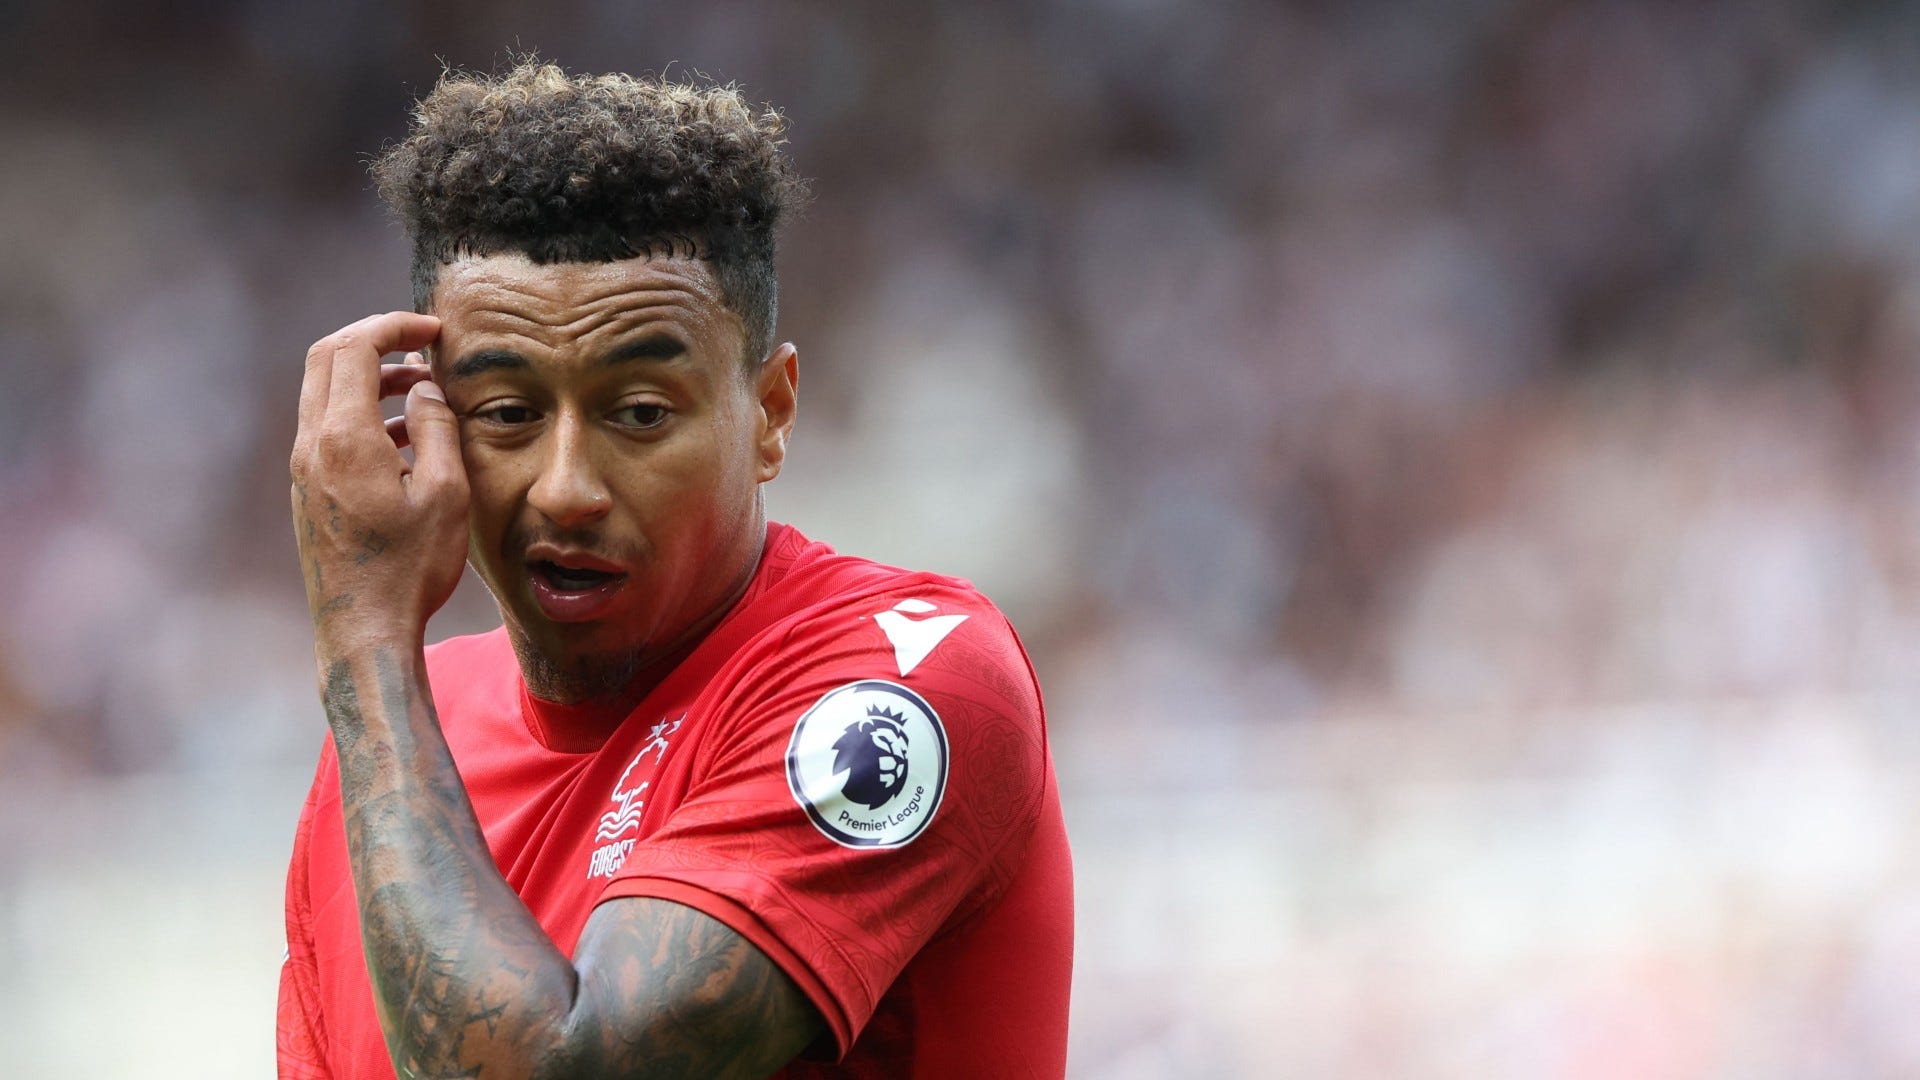 jesse-lingard-released-by-nottingham-forest-after-disastrous-one-year-spell-as-former-man-utd-star-becomes-free-agent-ahead-of-summer-transfer-window-or-goal-com-india